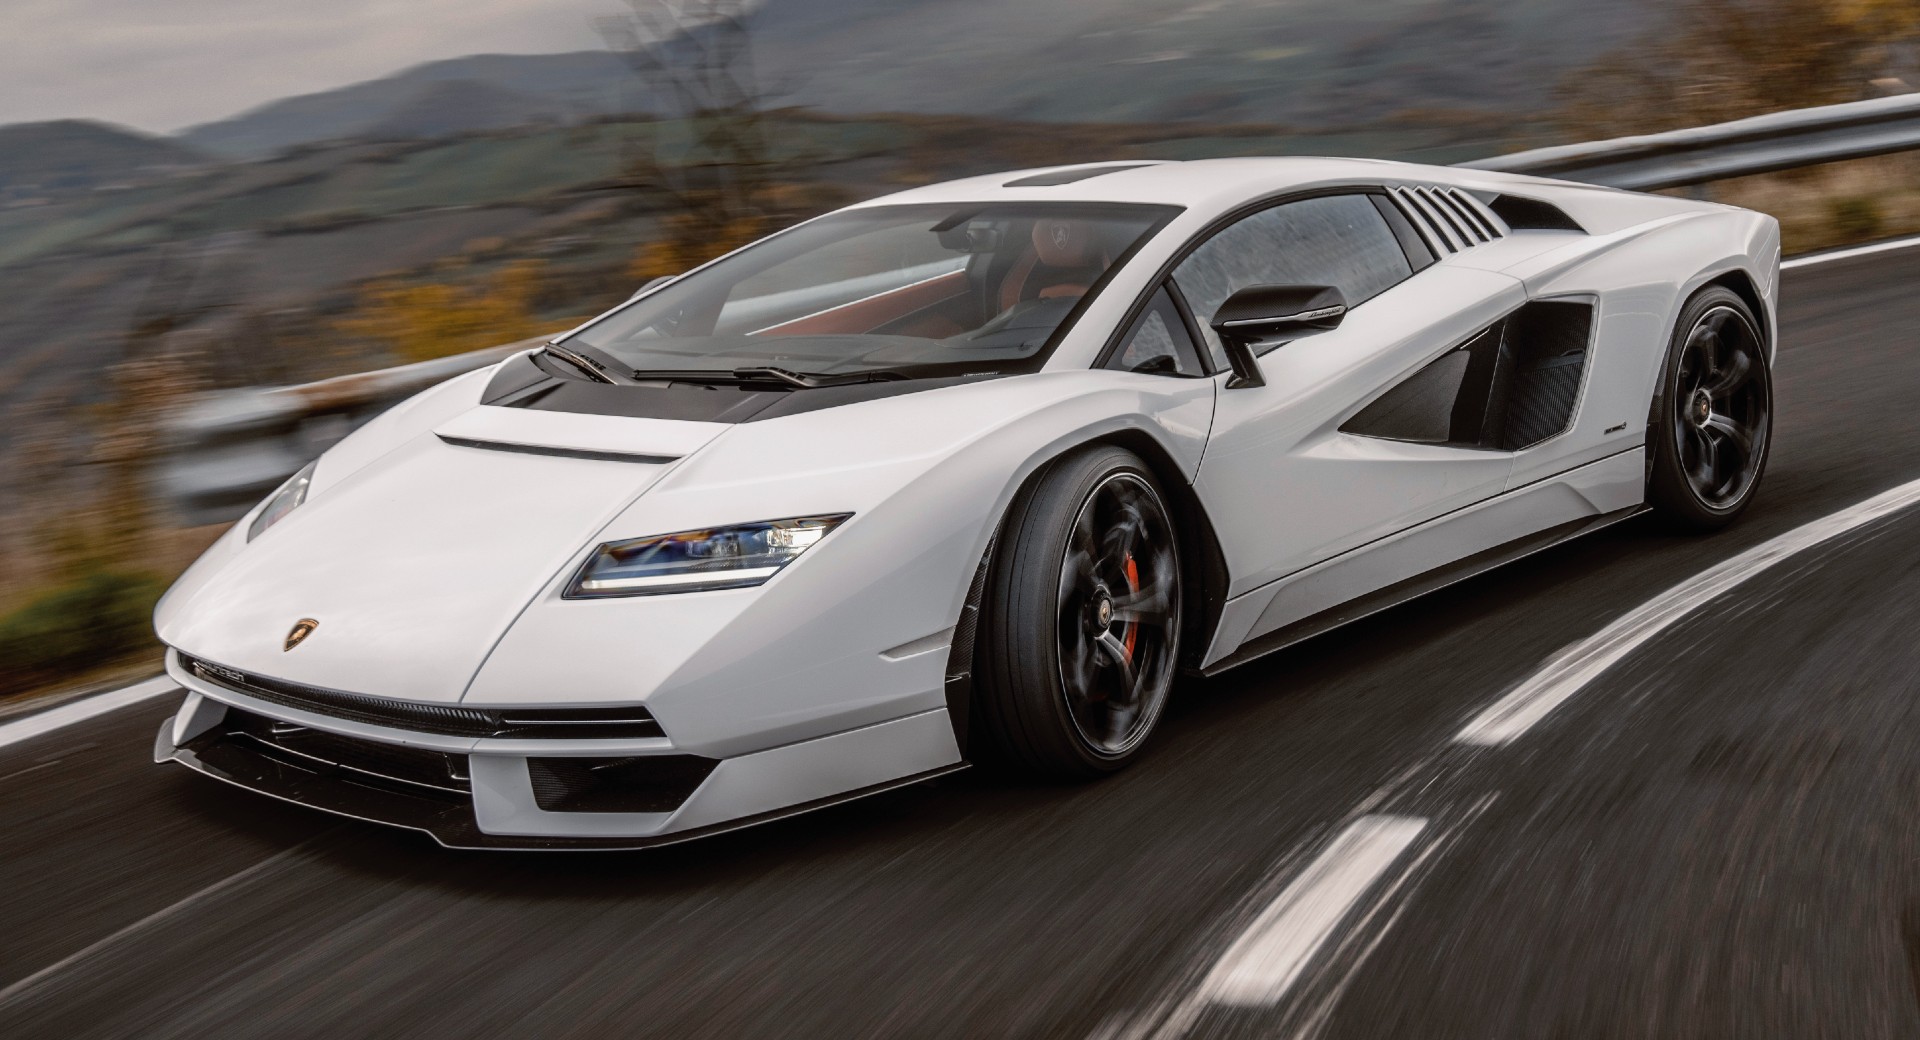 The Lamborghini Countach LPI 800-4 Does Look Better On The Road | Carscoops